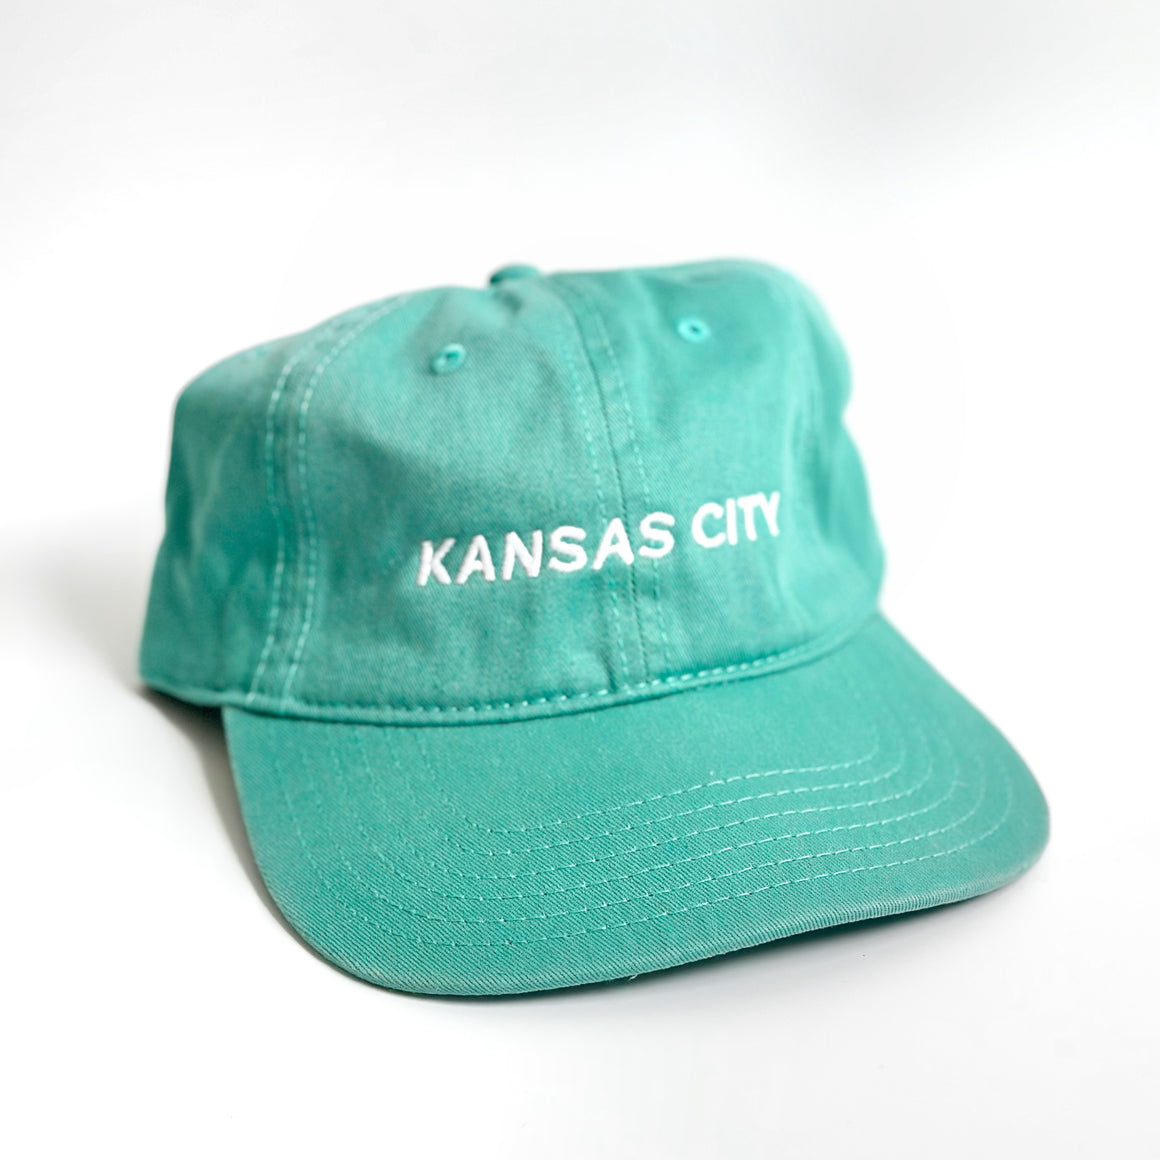 Kansas City Embroidered Hat - Teal